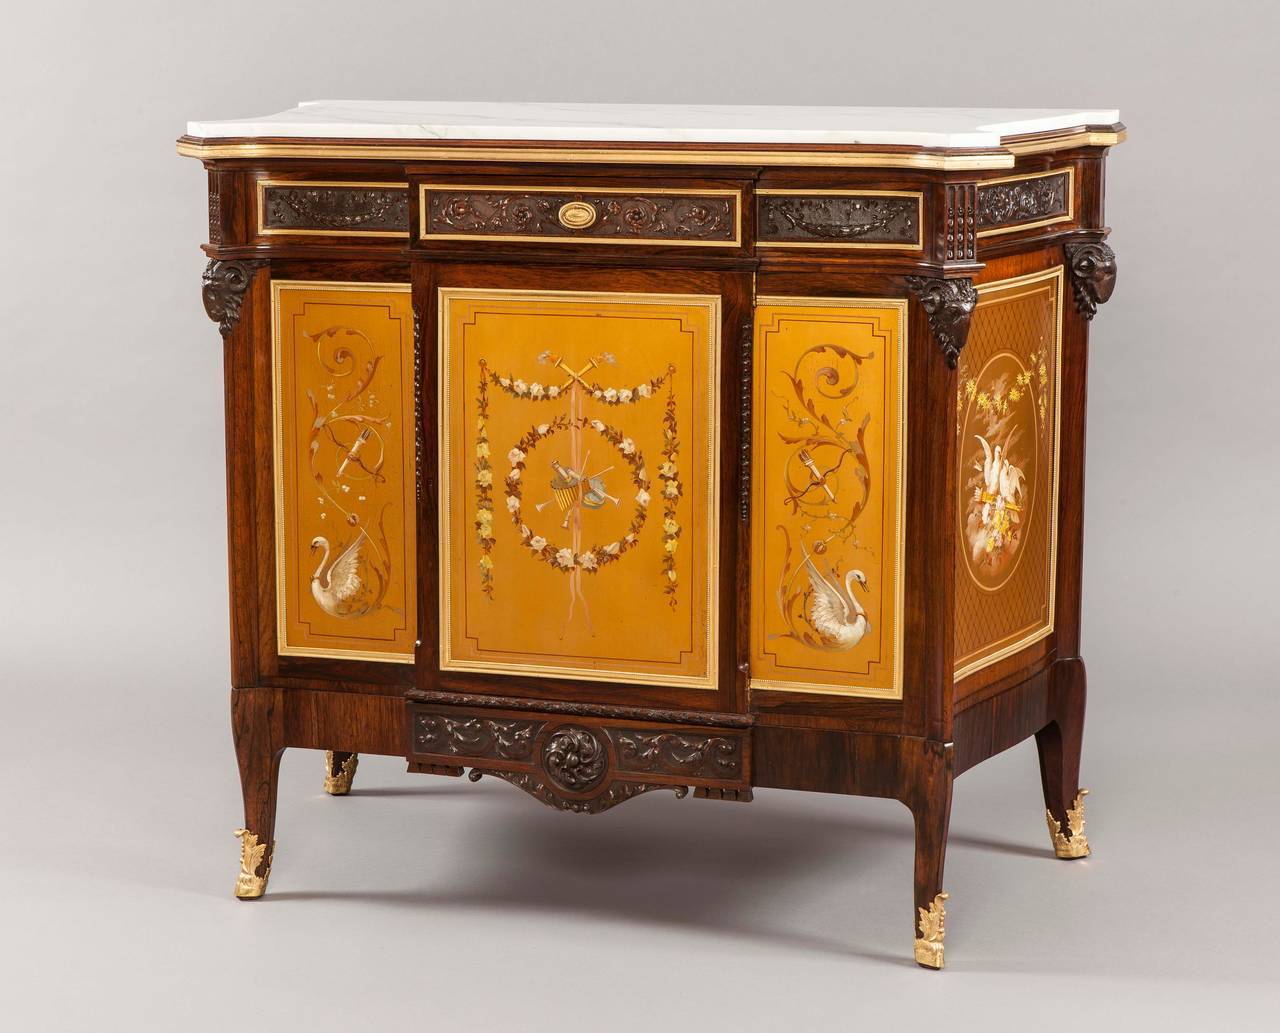 A cabinet in the Louis XVI manner by James Shoolbred and Co of London

Of gentle breakfront form, constructed in goncalo alves, dressed with gilt metal mounts and hand decorated polychrome panels; rising from swept cabriole legs shod with gilt